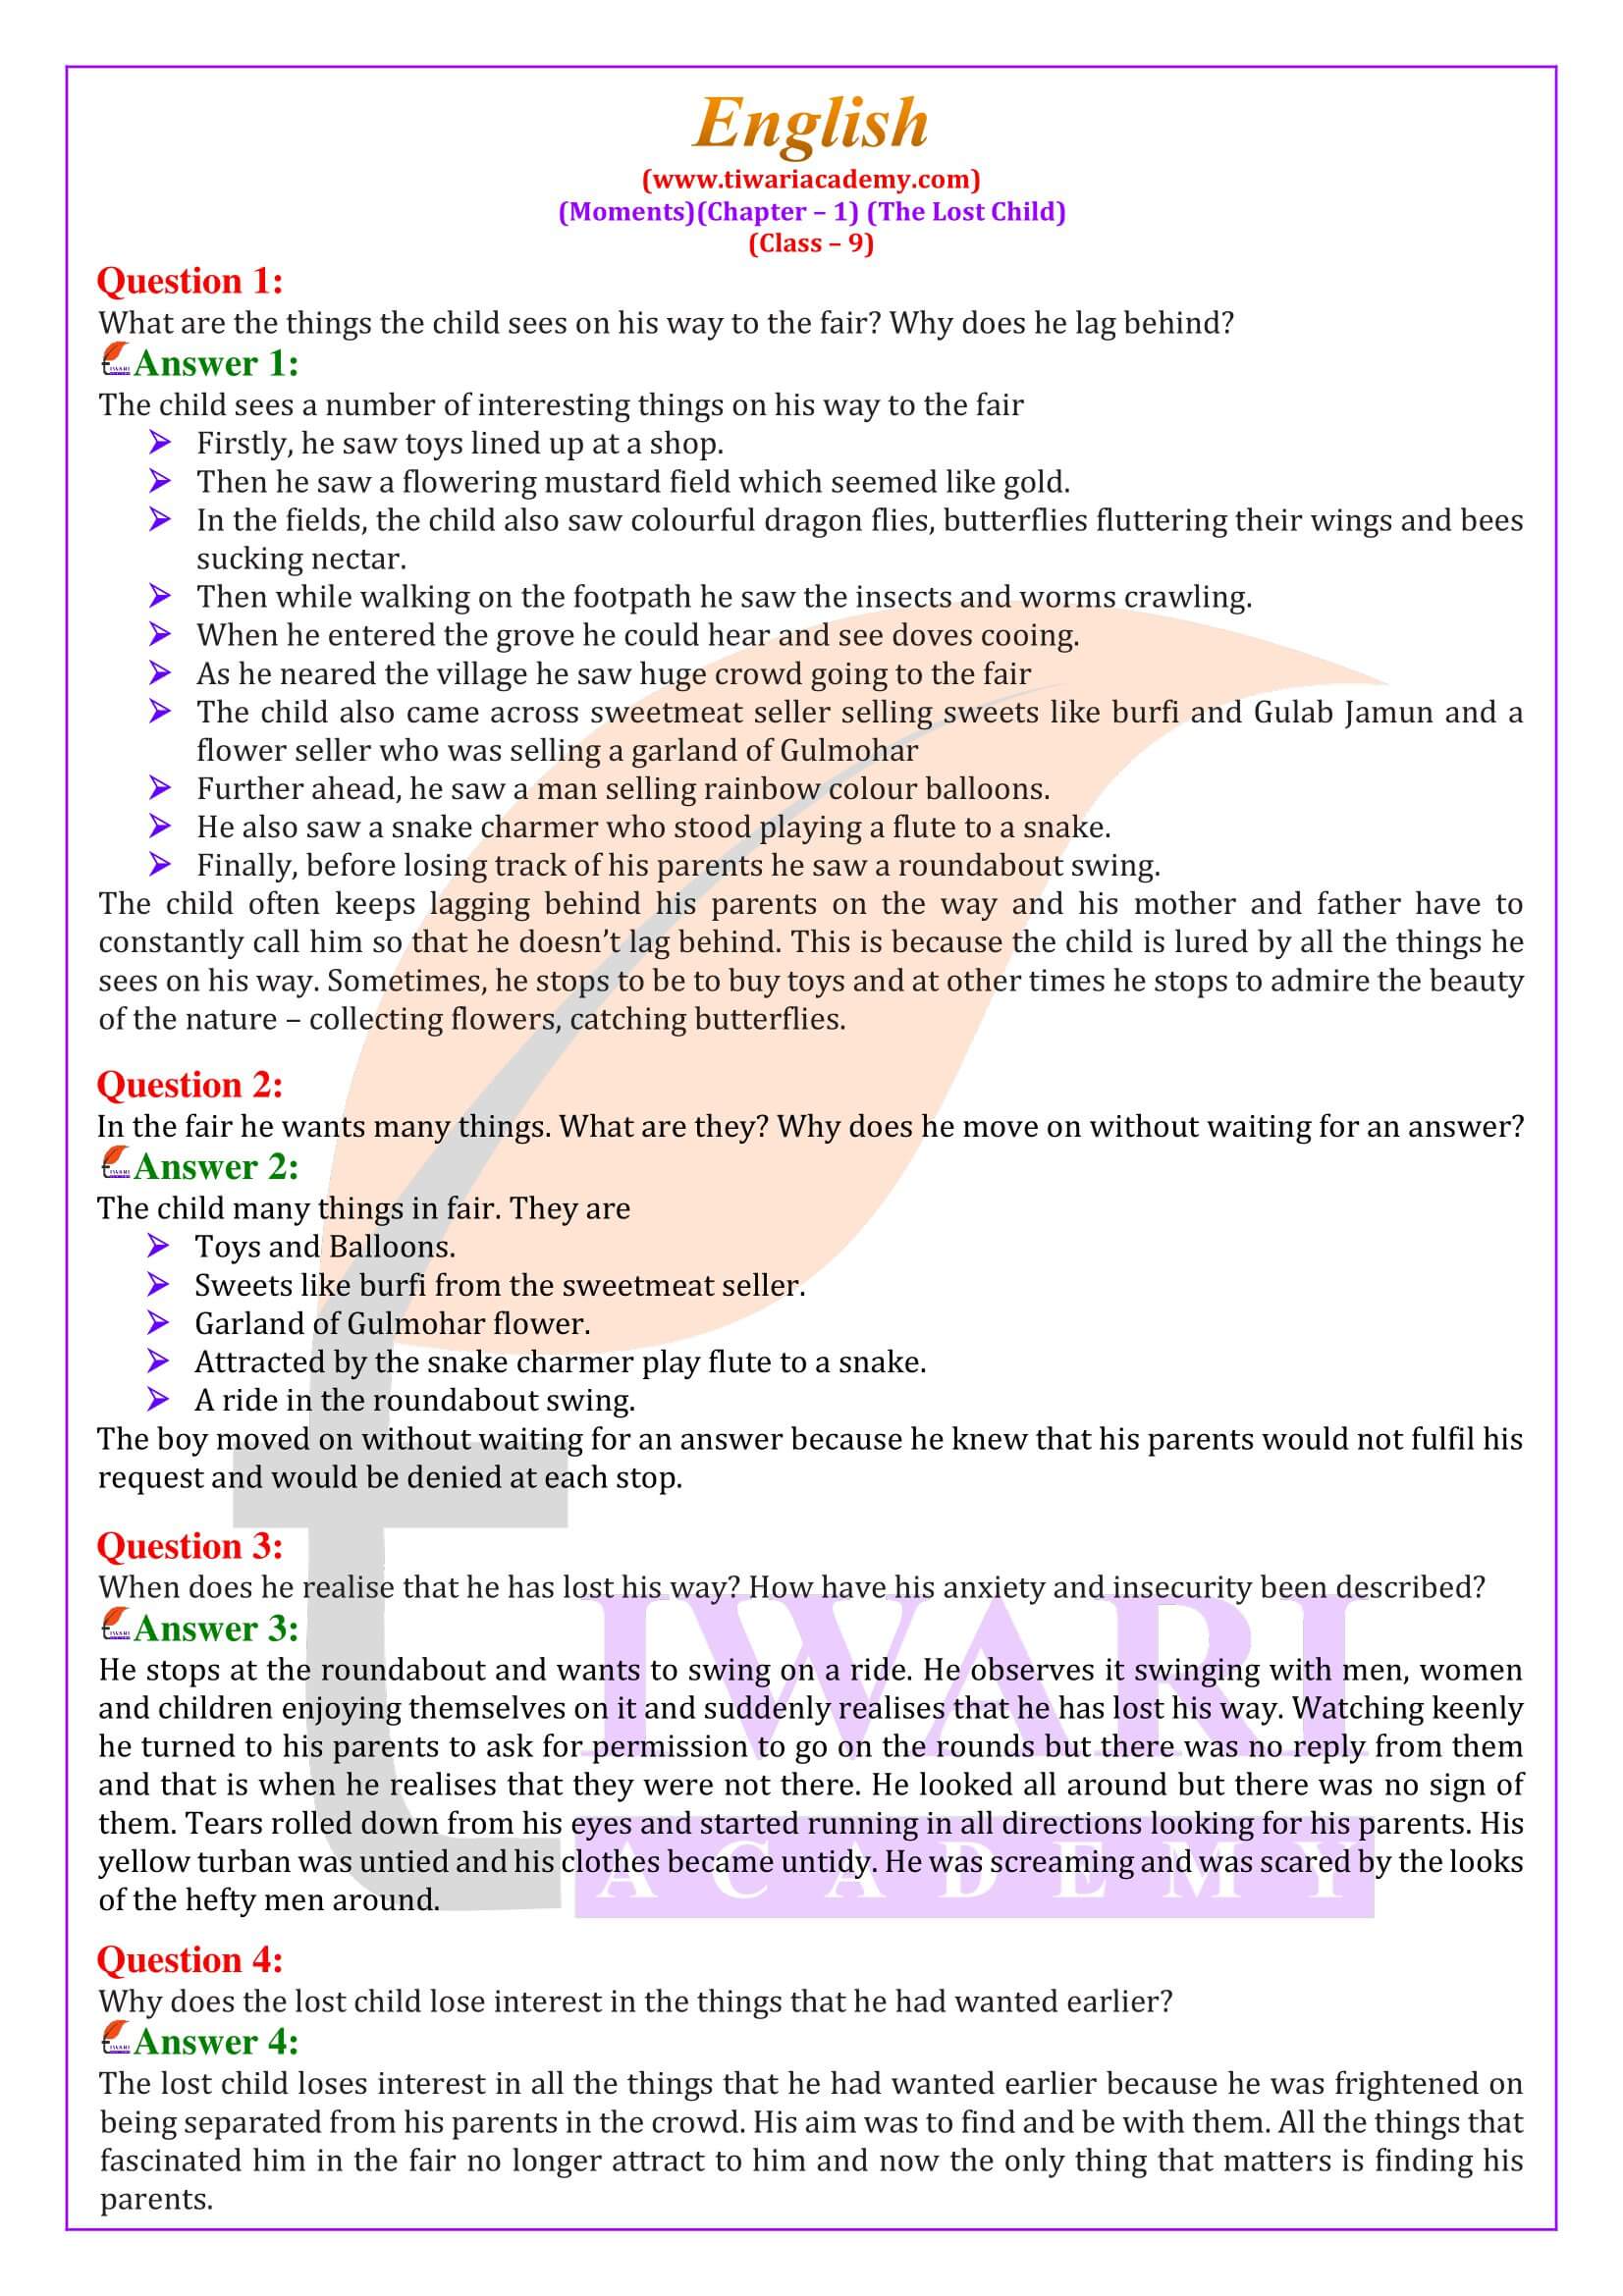 NCERT Solutions for Class 9 English Moments Chapter 1